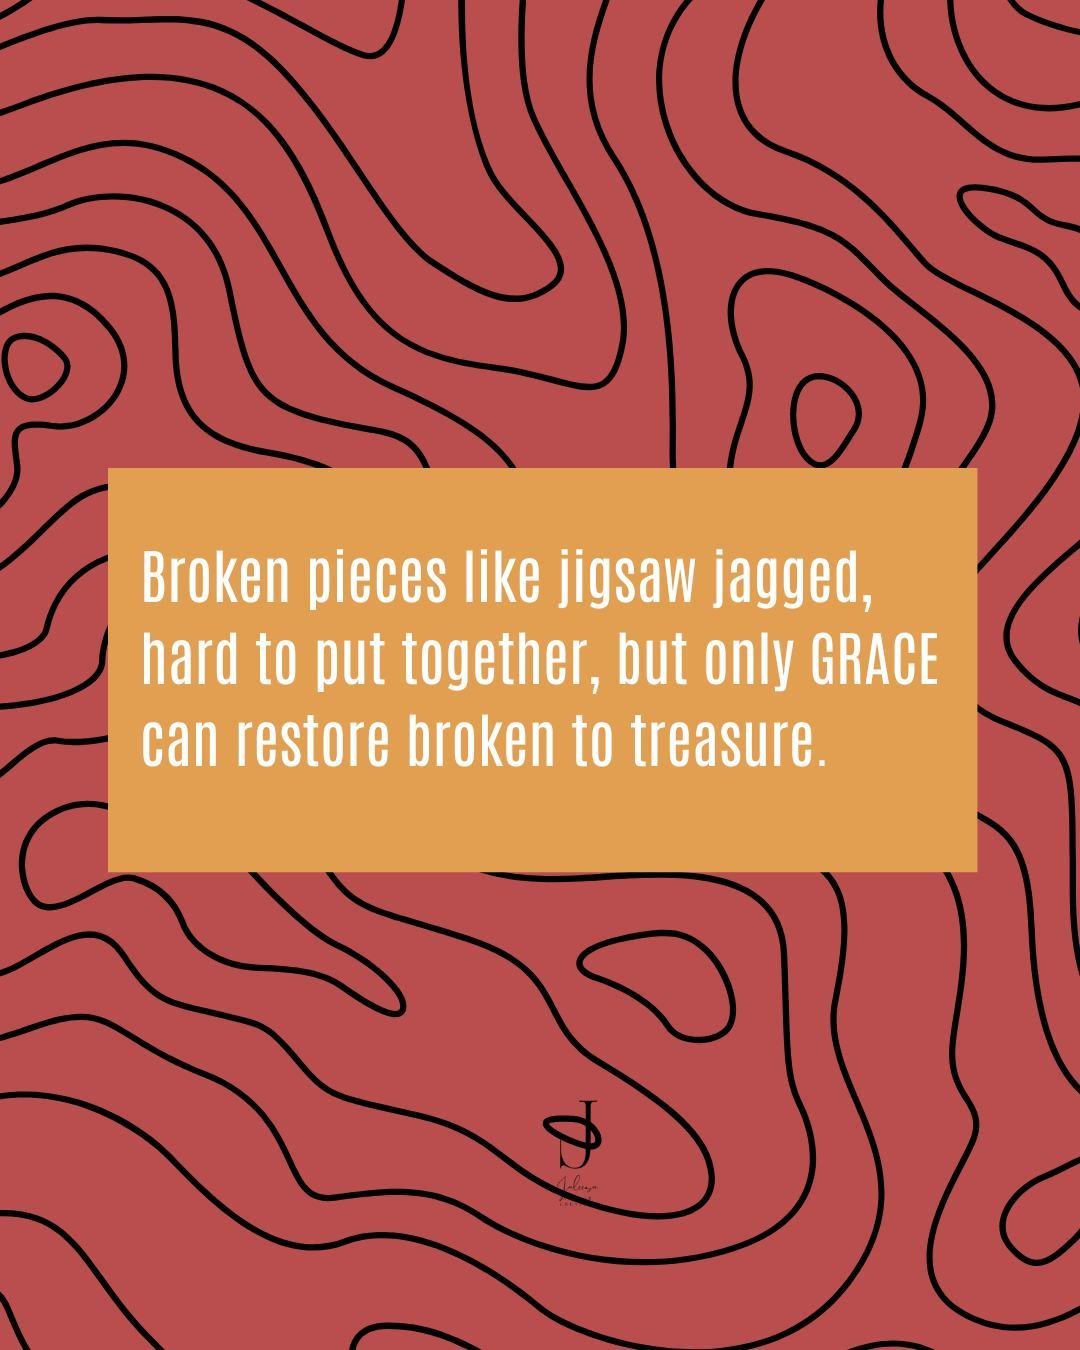 Have you ever felt like you're missing a piece of your heart?  Guess what, you're still wonderfully made. Peace has escaped and you long for the freeness you once had. Let GRACE restore those broken pieces to a beautifully renewed masterpiece. 

When